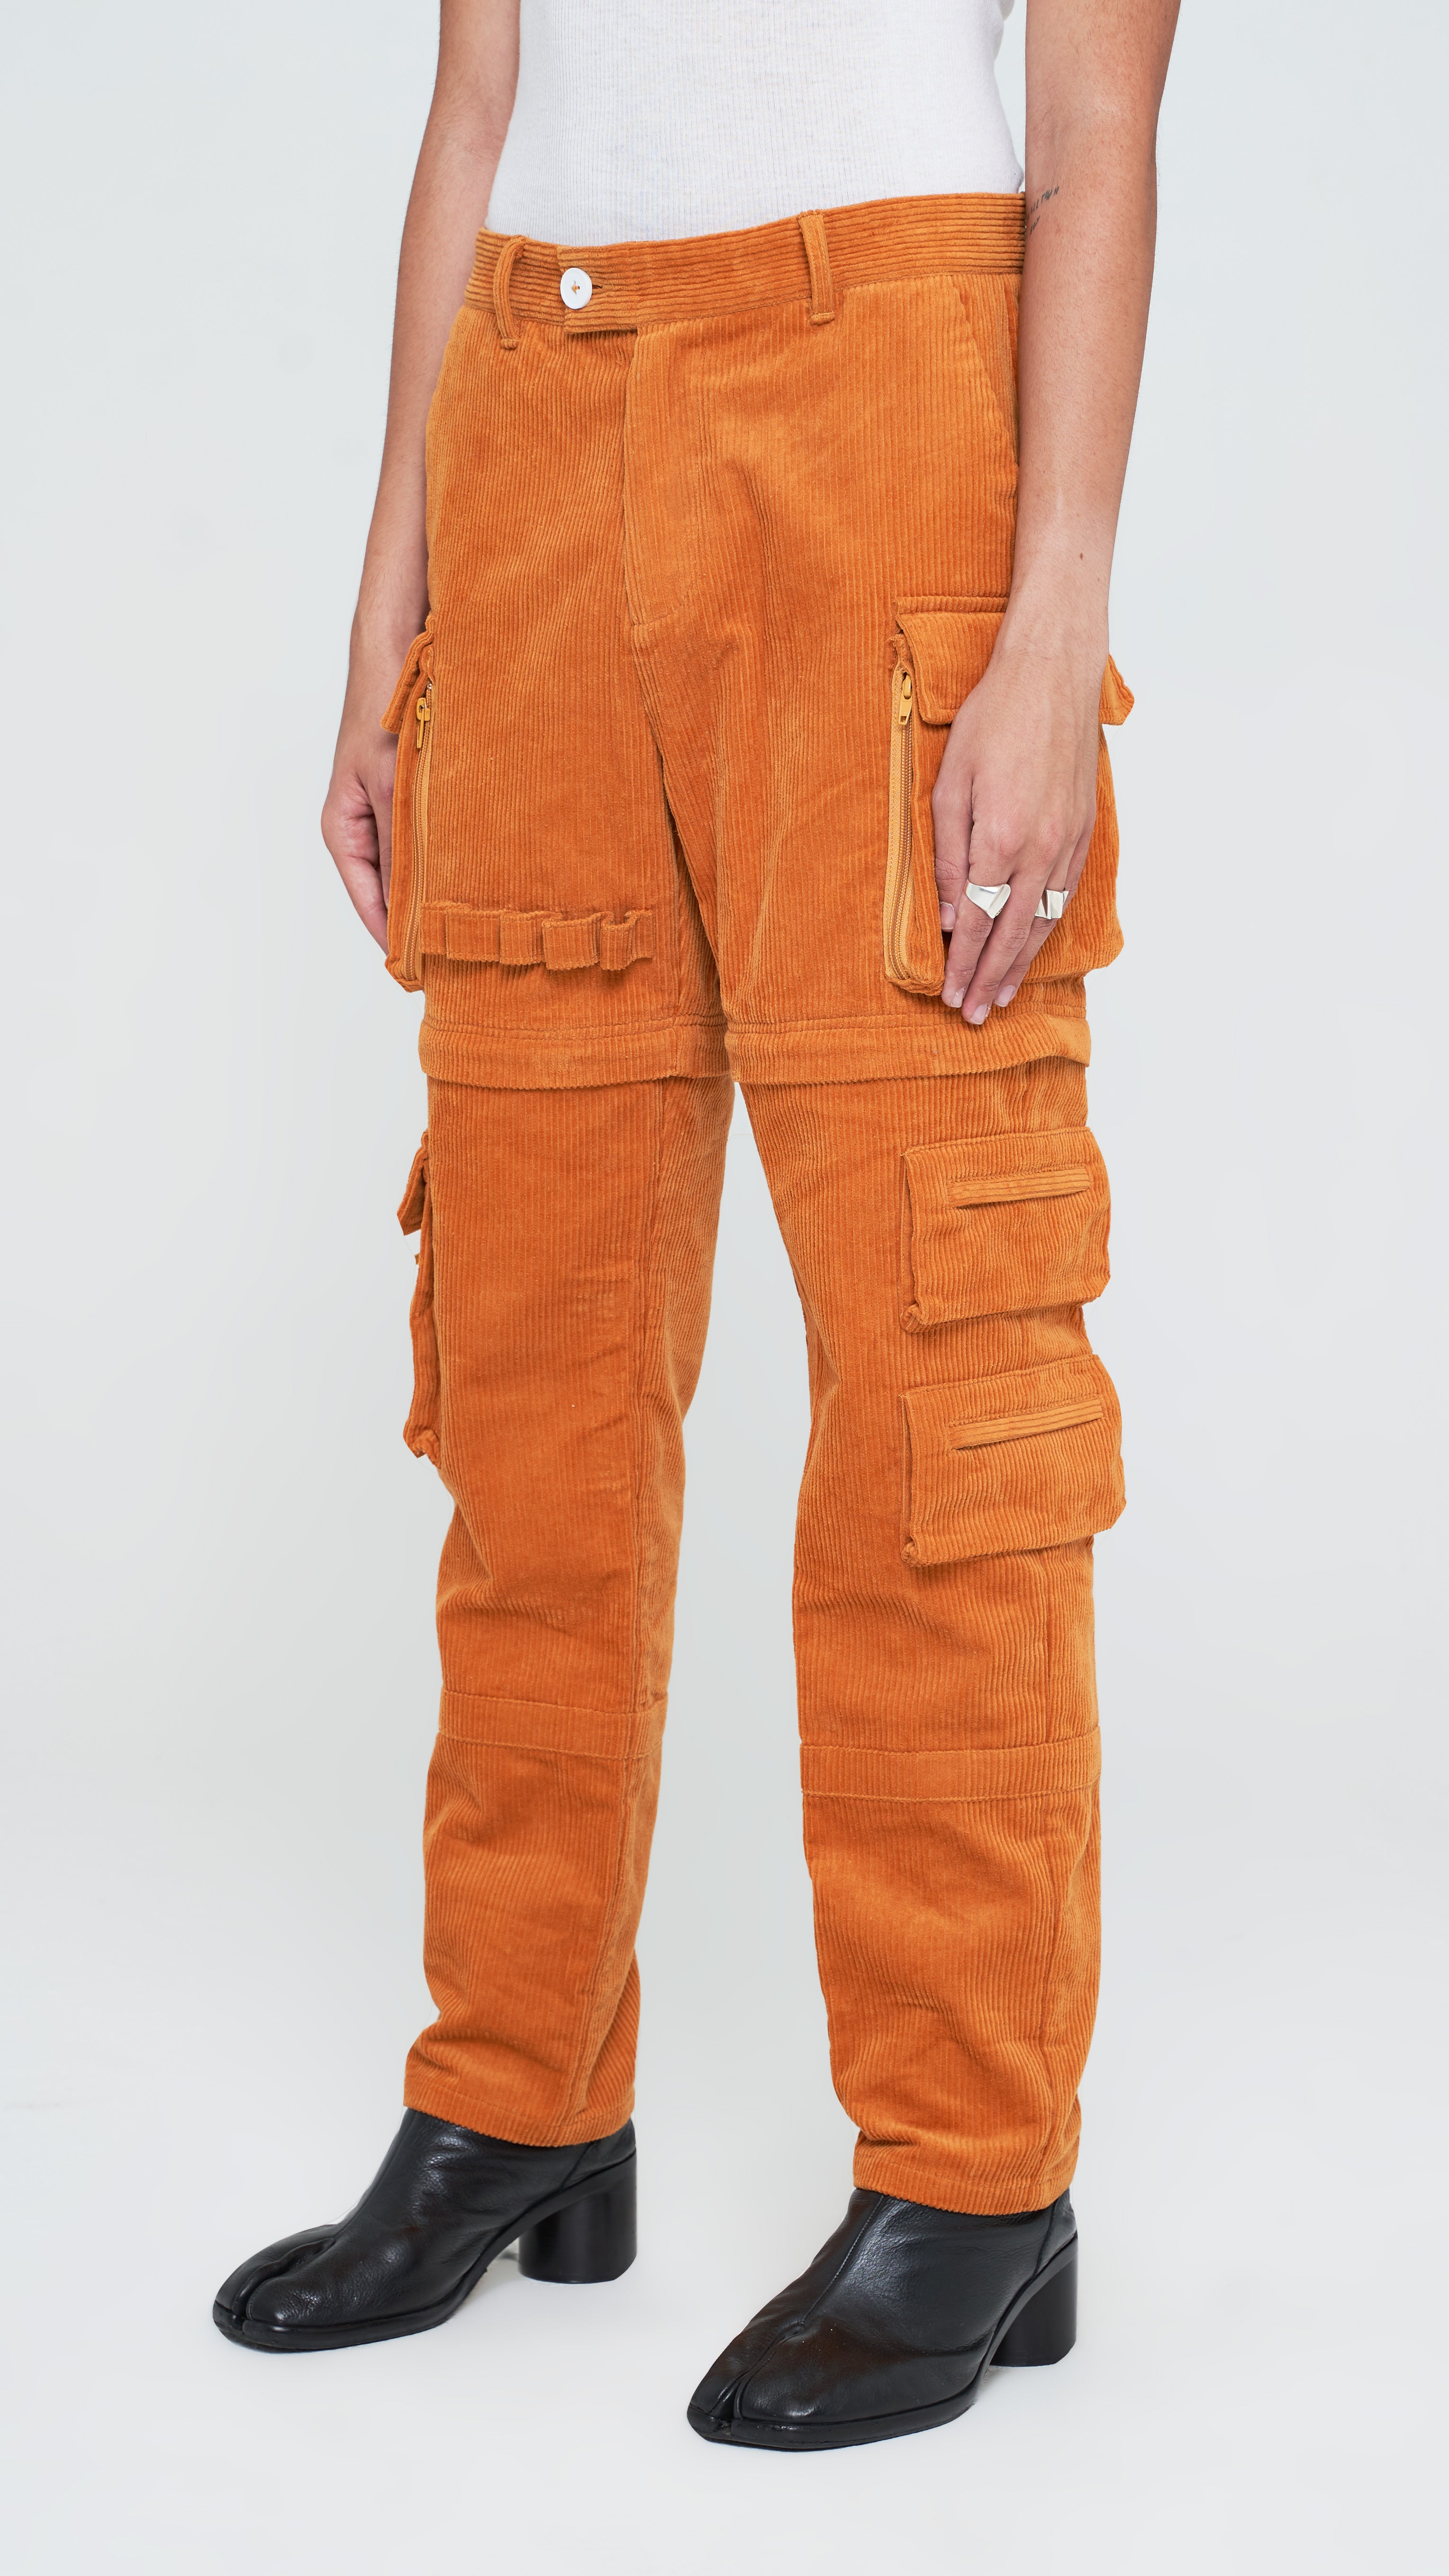 Upgraded with an improved corduroy fabric in apricot brown and better sizing. These pants are adaptable for year-round wear, these utility pants are built from a functional corduroy fabric with fair stretch. Its construction is secured with stitched panels and it's made with plenty of utilitarian appeal with multiple pockets. These trousers are competent for any season as it's zipper-adjustable and can be transformed into a pair of shorts when the temperature rises.